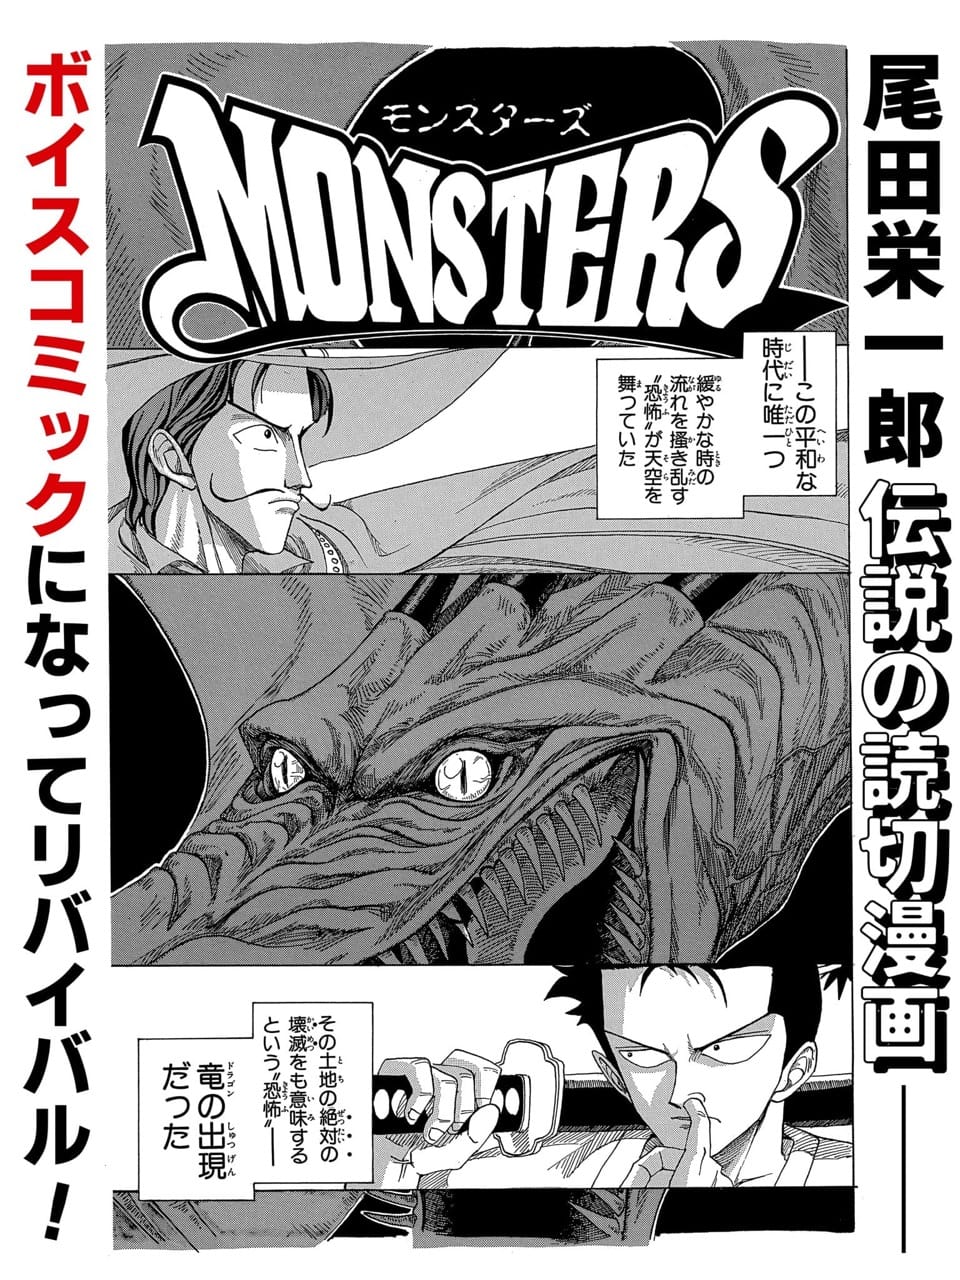 Monsters ボイスコミック 9月6日より前編配信 キャスト情報も